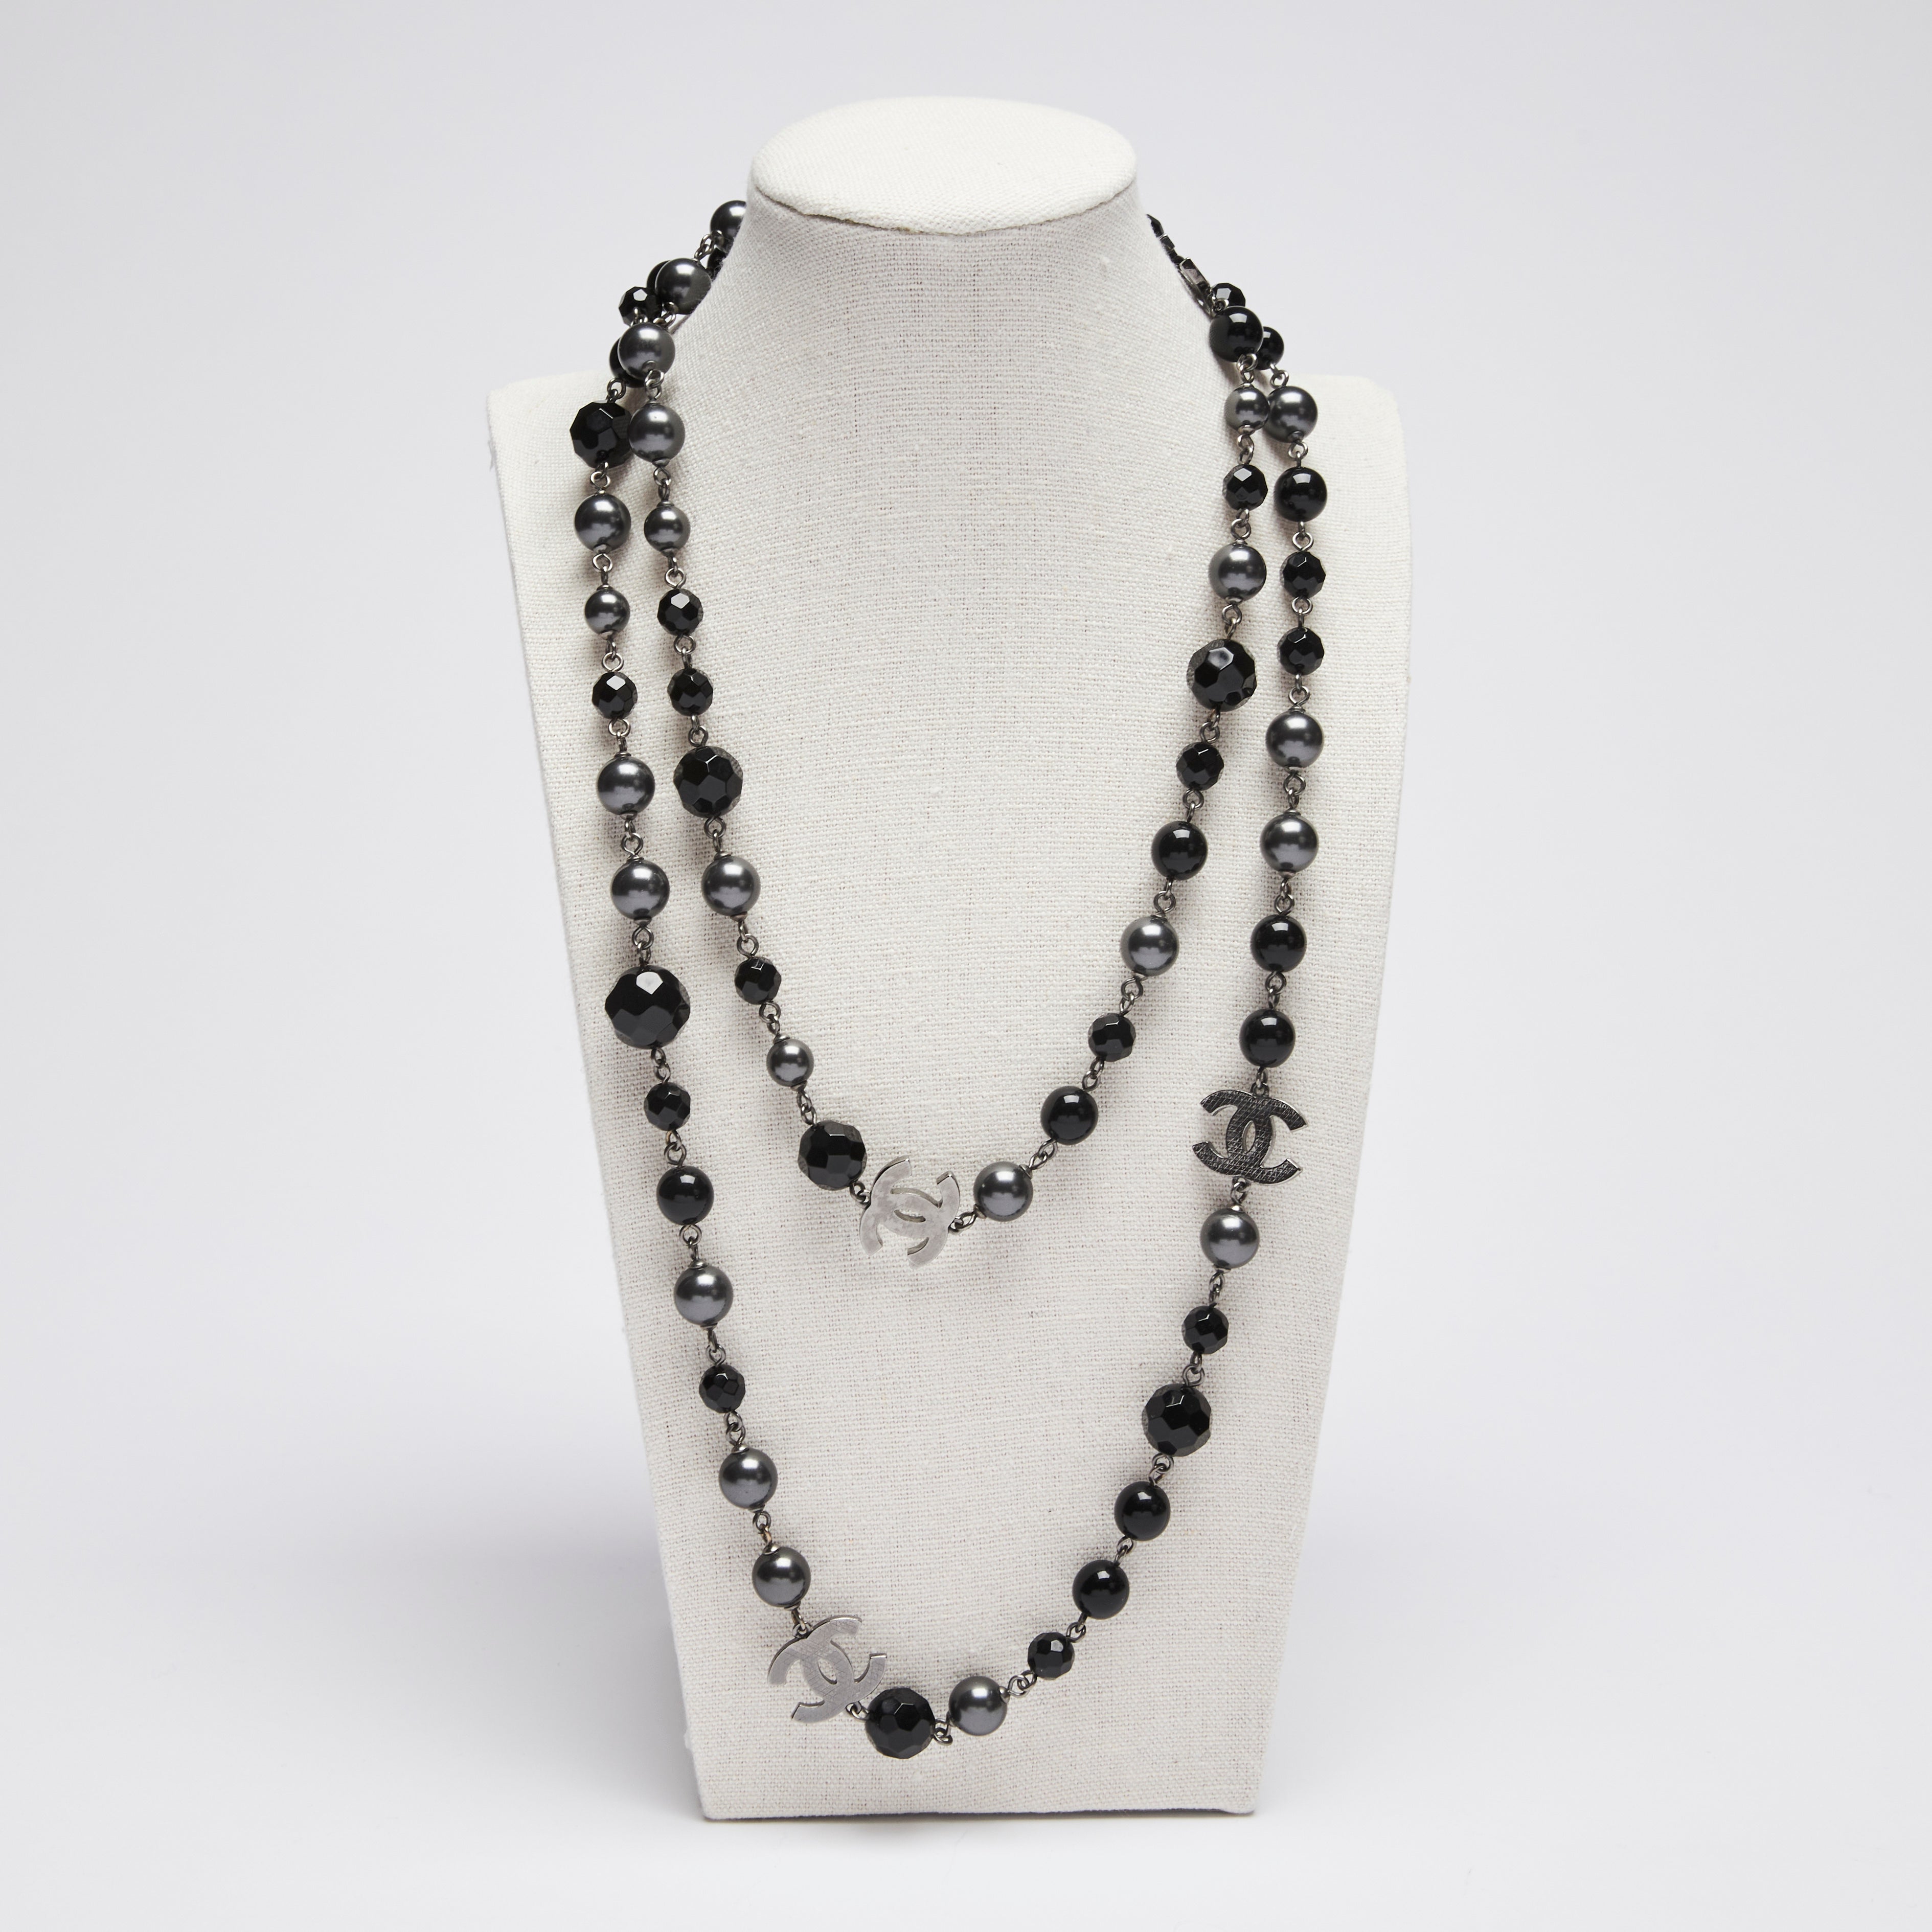 Long necklace - Metal, glass pearls & strass, silver, black & crystal —  Fashion